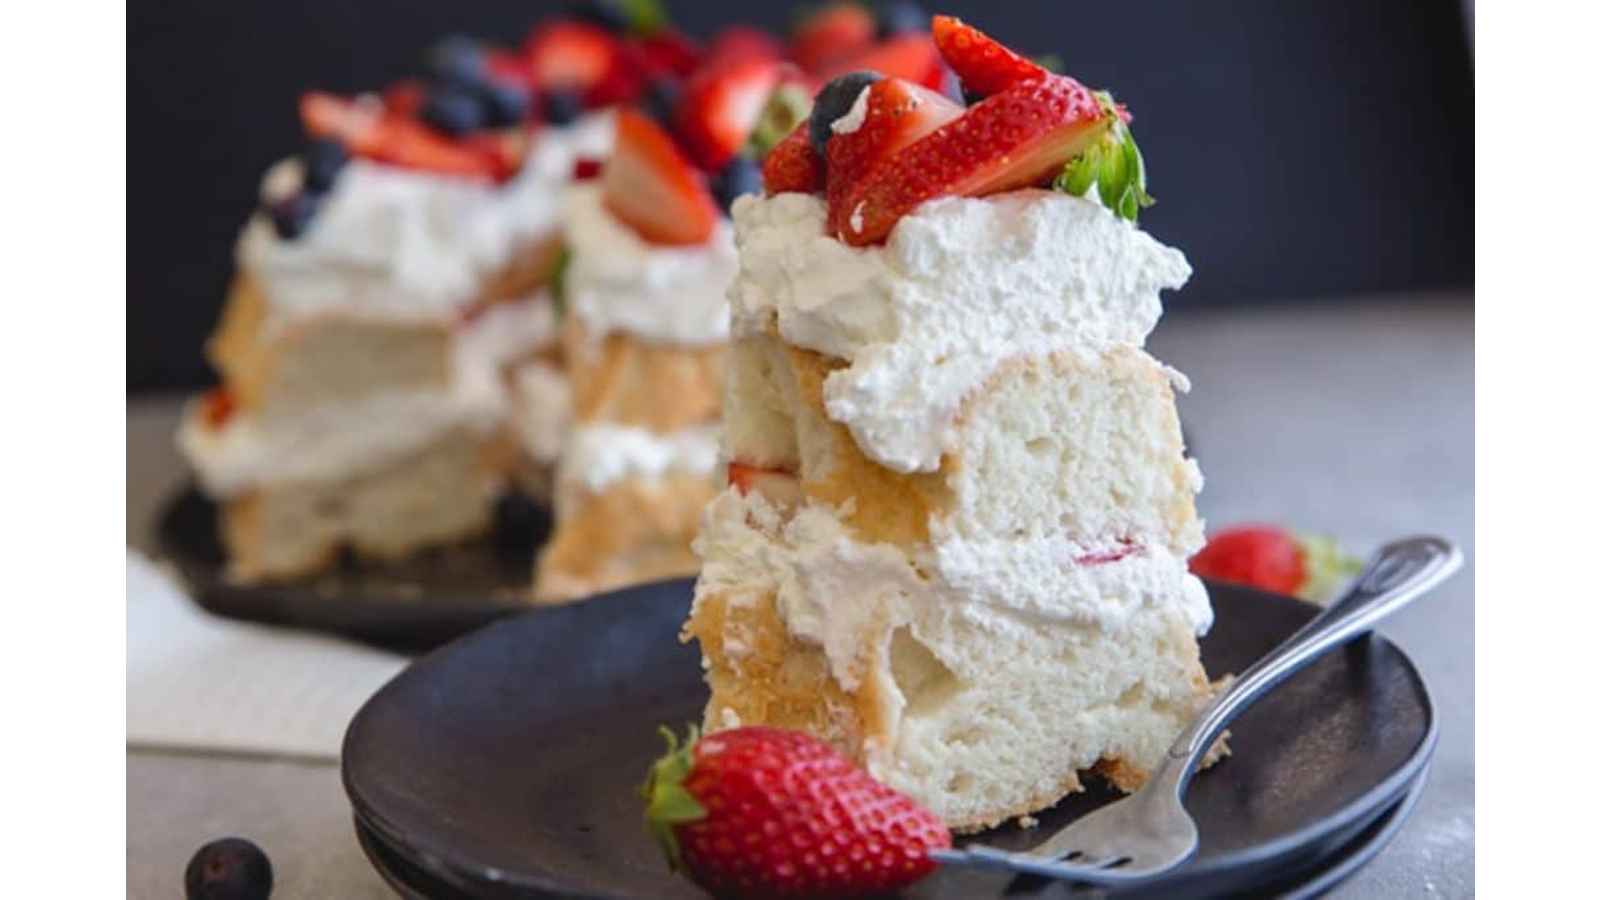 National Angel Food Cake Day 2023: Date, History, Facts about Angel Food Cake